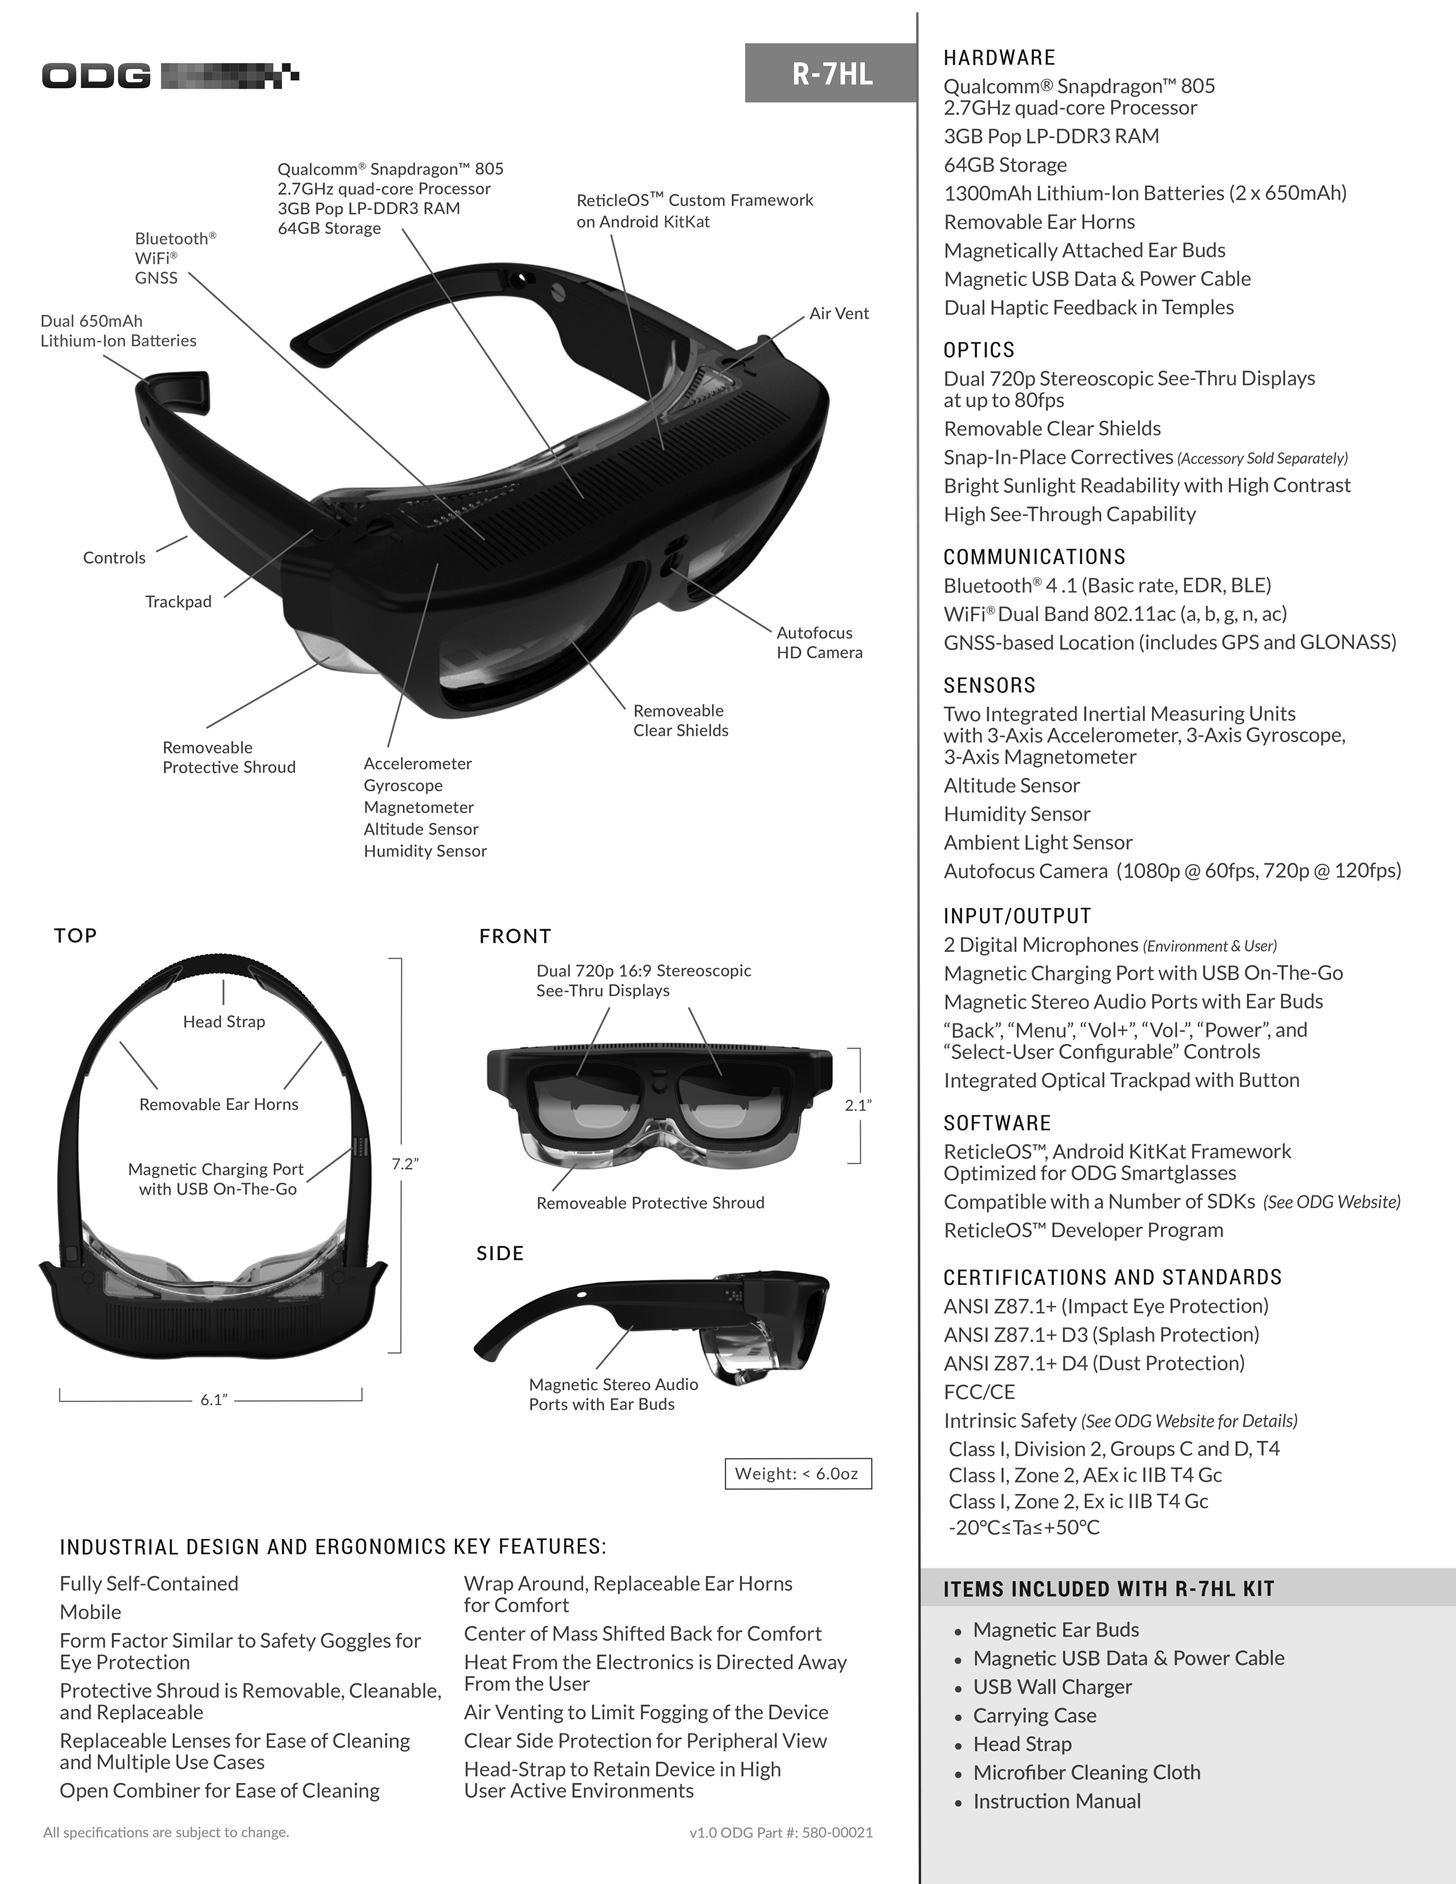 ODG's New R-7HL Are the First Rugged Smartglasses Made Specifically for the Industrial Workforce